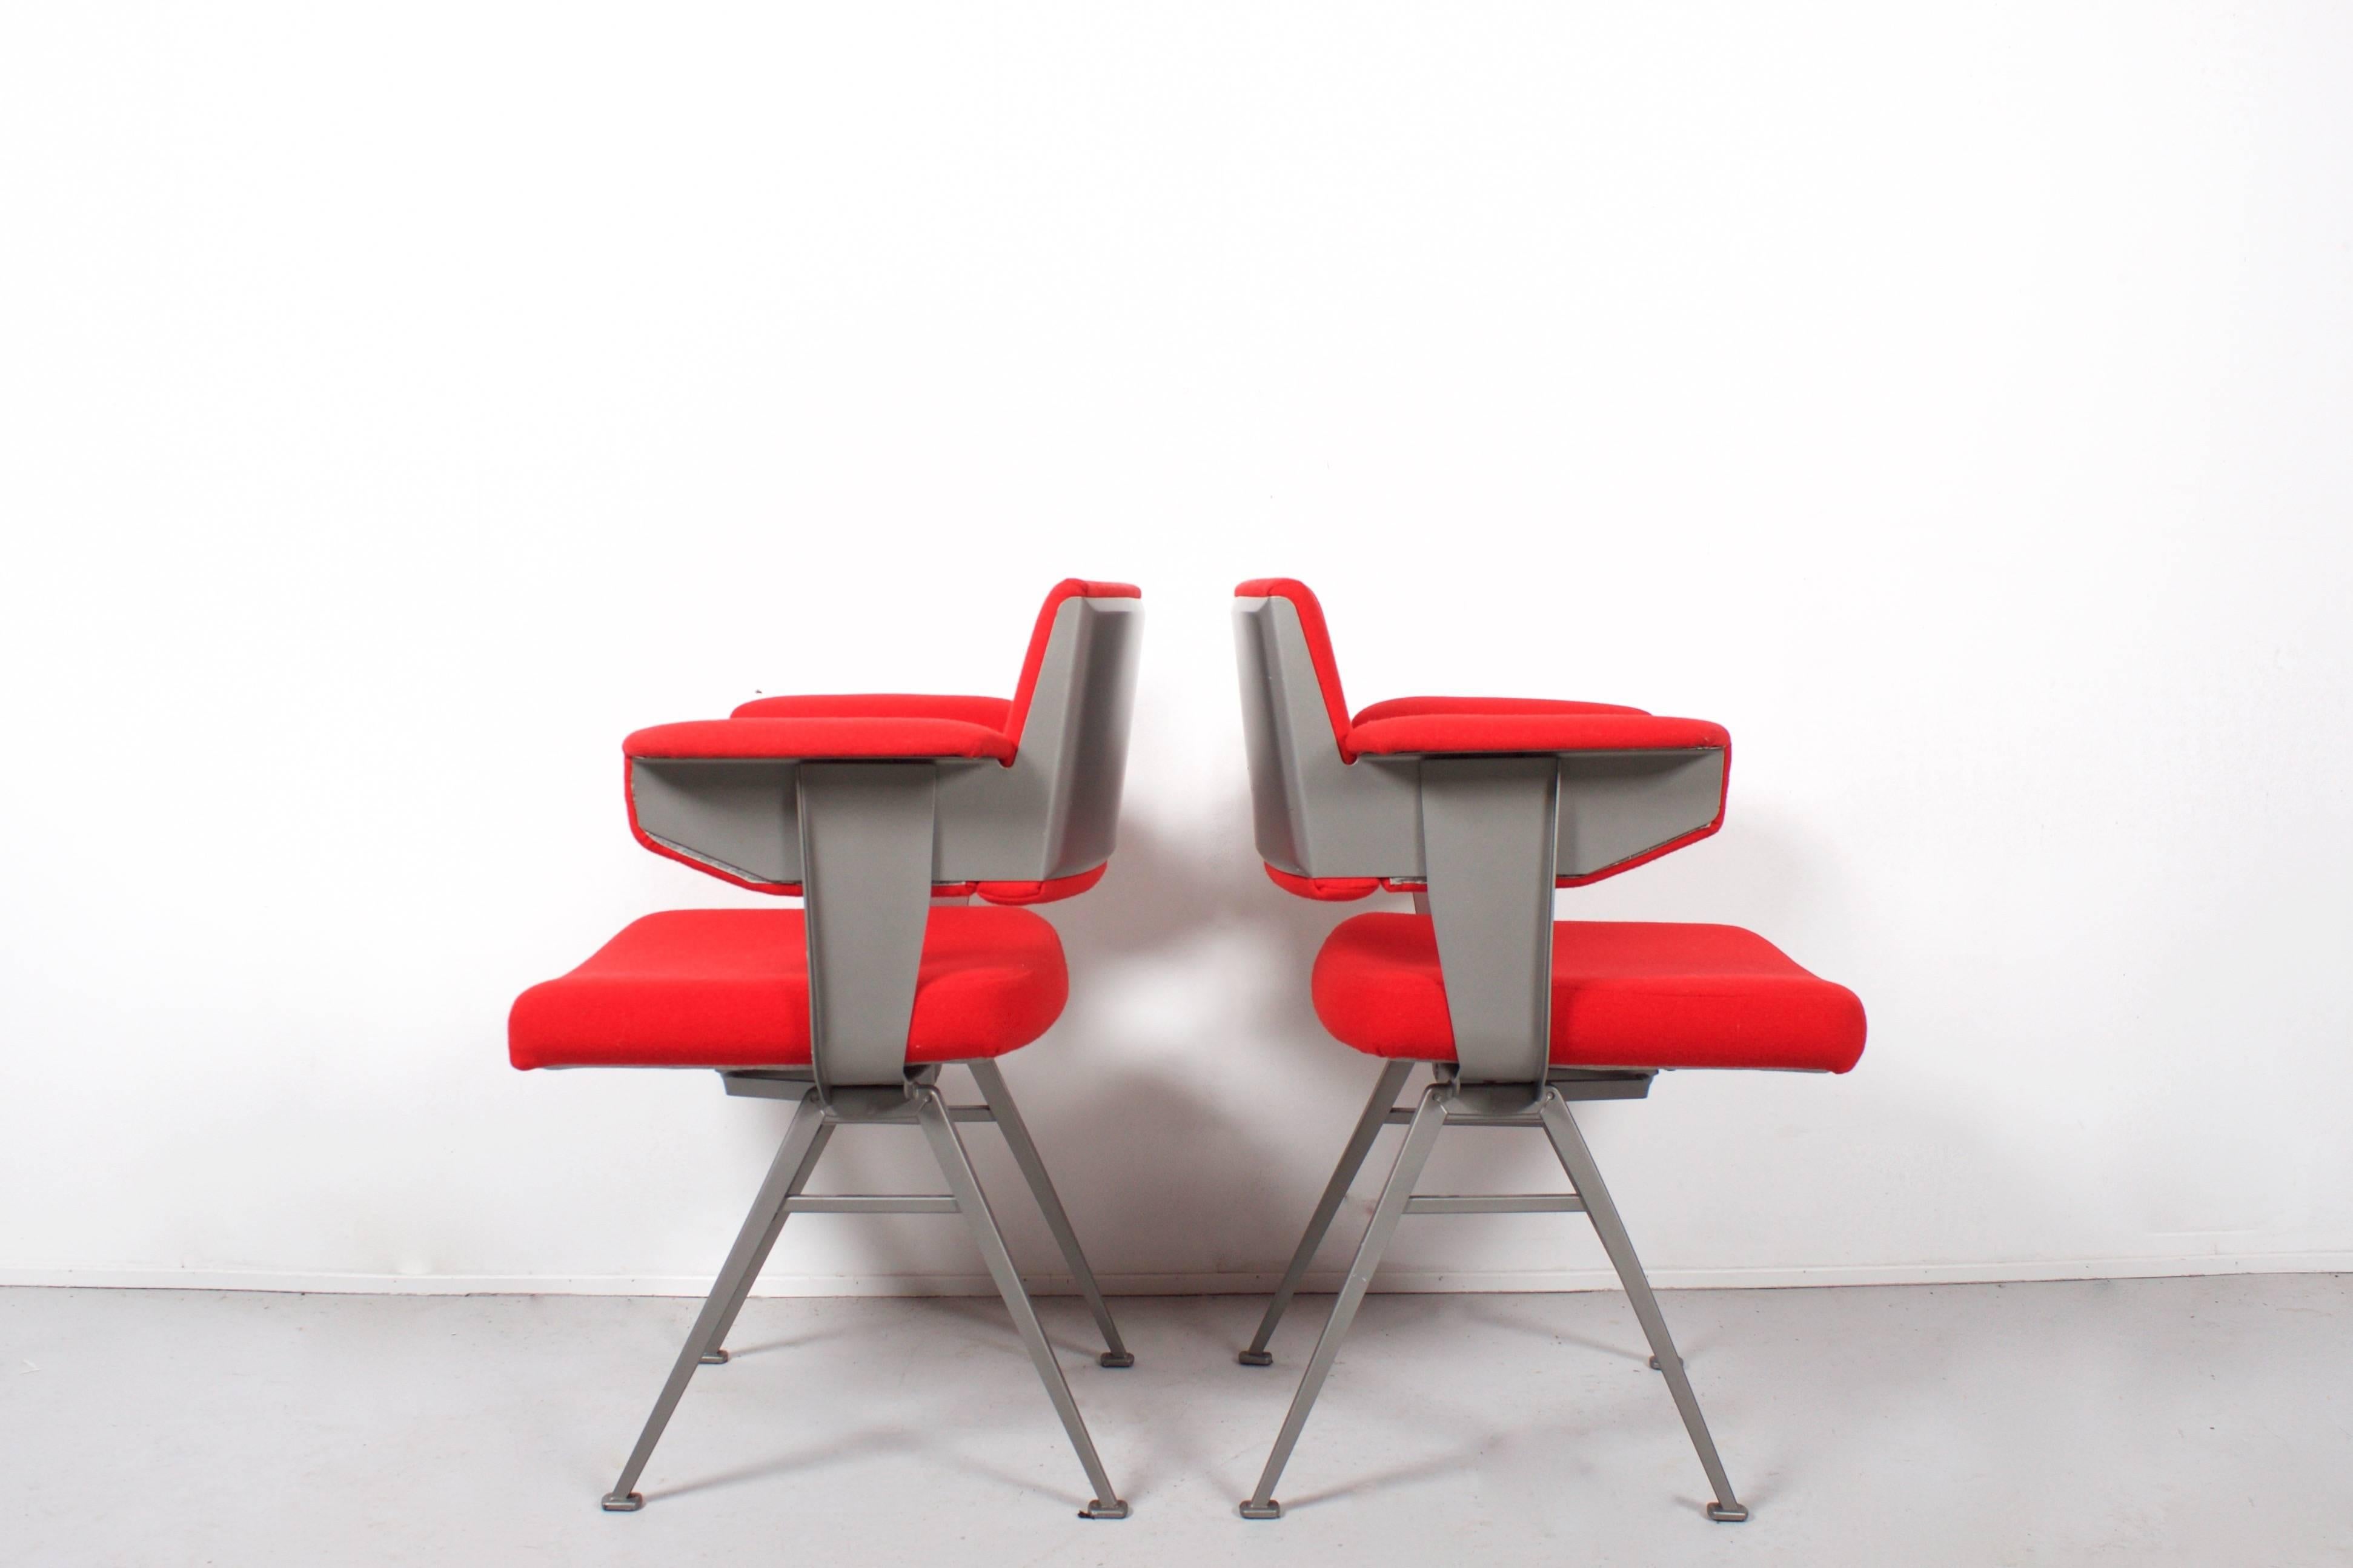 Set of Ahrend de Cirkel ‘Resort’ chairs.

Designed by Friso Kramer in the 1960s 

Frame made of lacquered steel.

Upholstered in a bright red Kvadrat Tonus fabric.

Very comfortable chairs with a Industrial look.

From now on all large and fragile